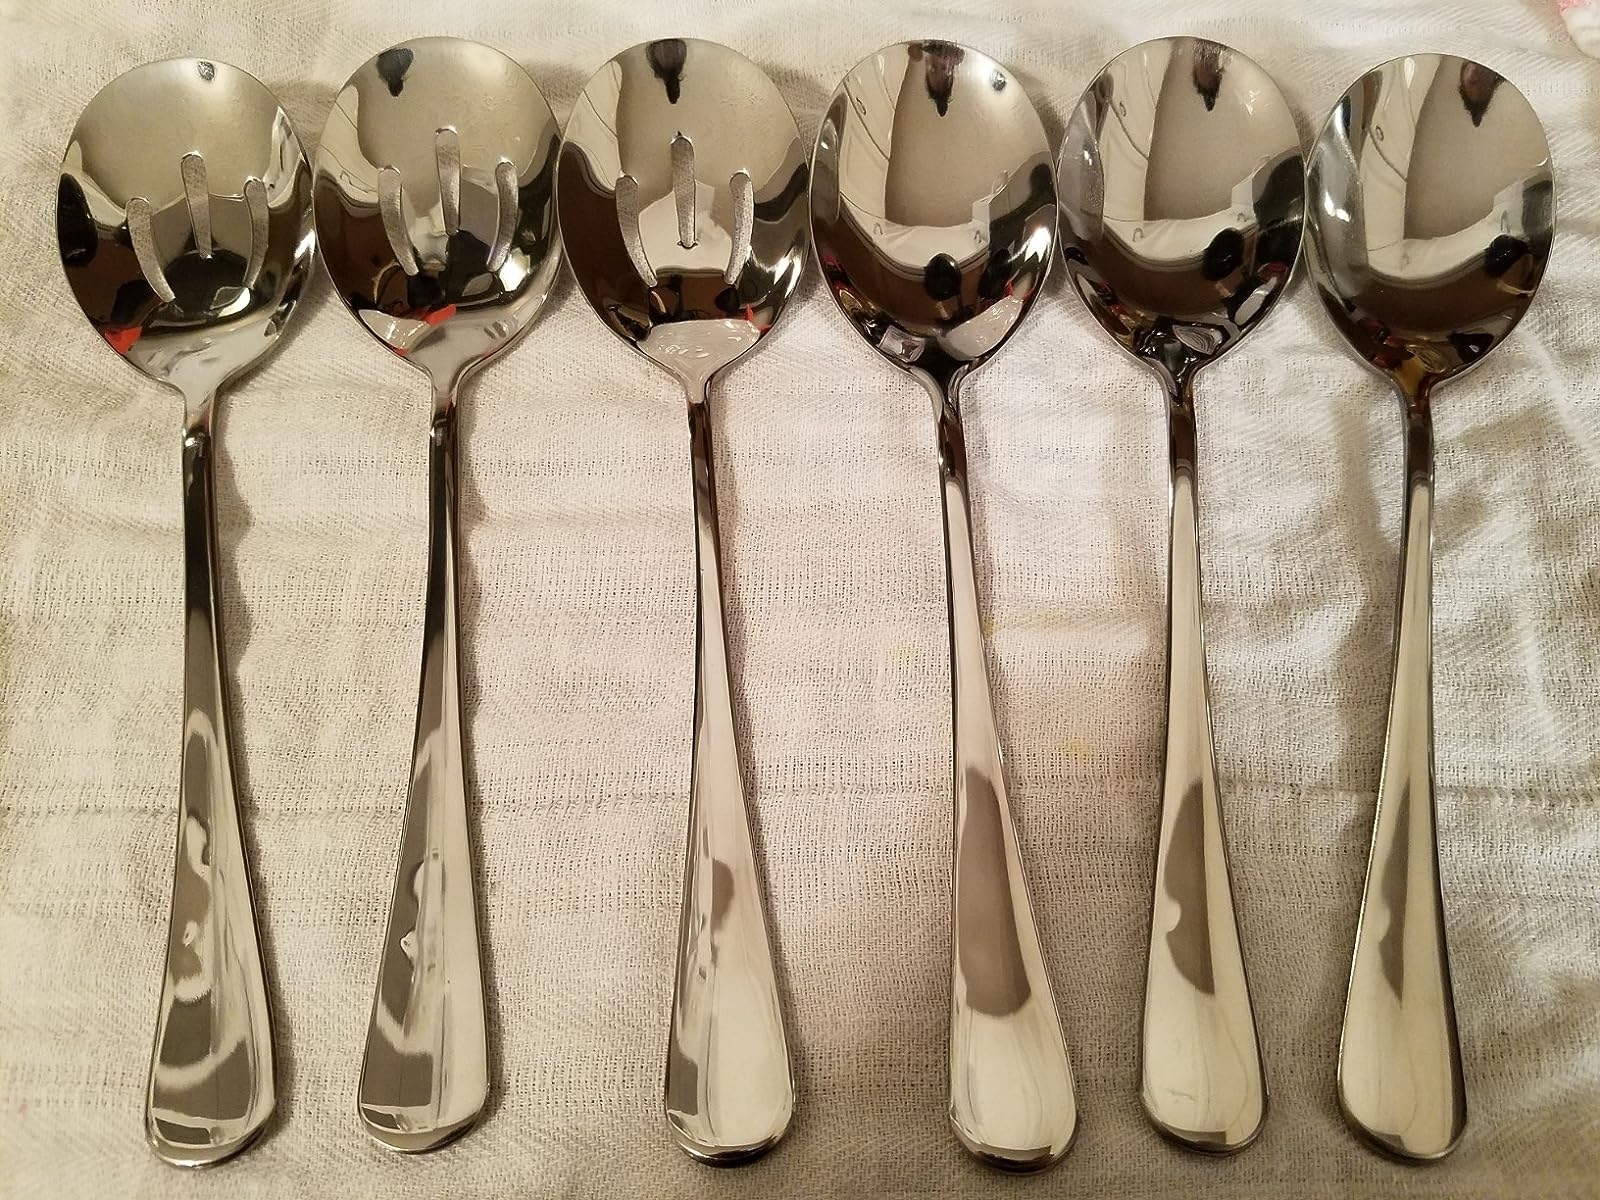 reviewers set of serving spoons